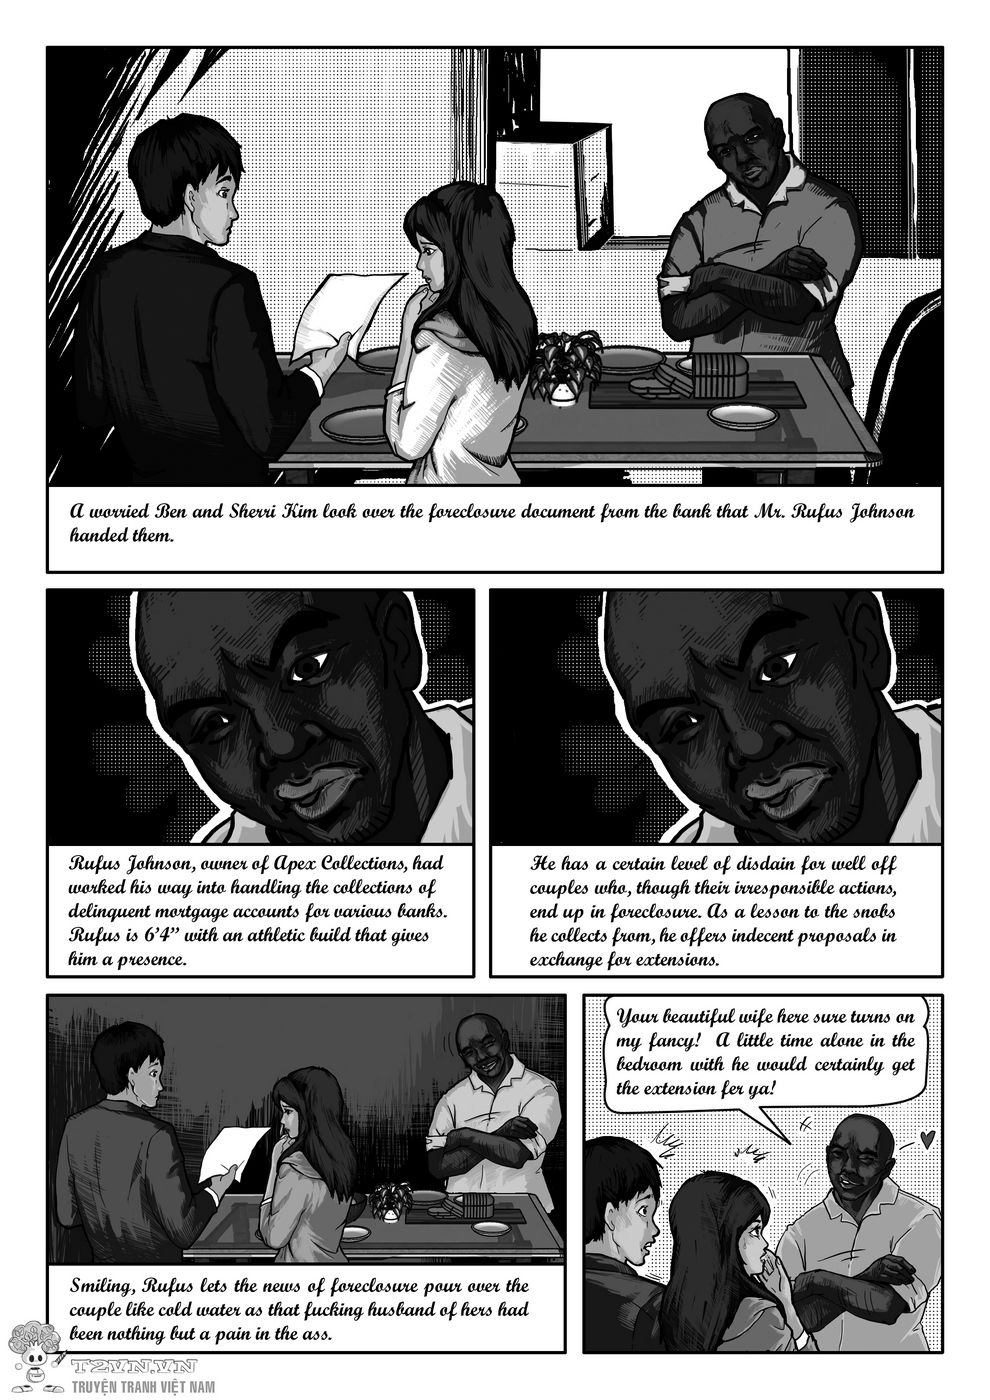 Forced Into Foreclosure - Paro Gide page 2